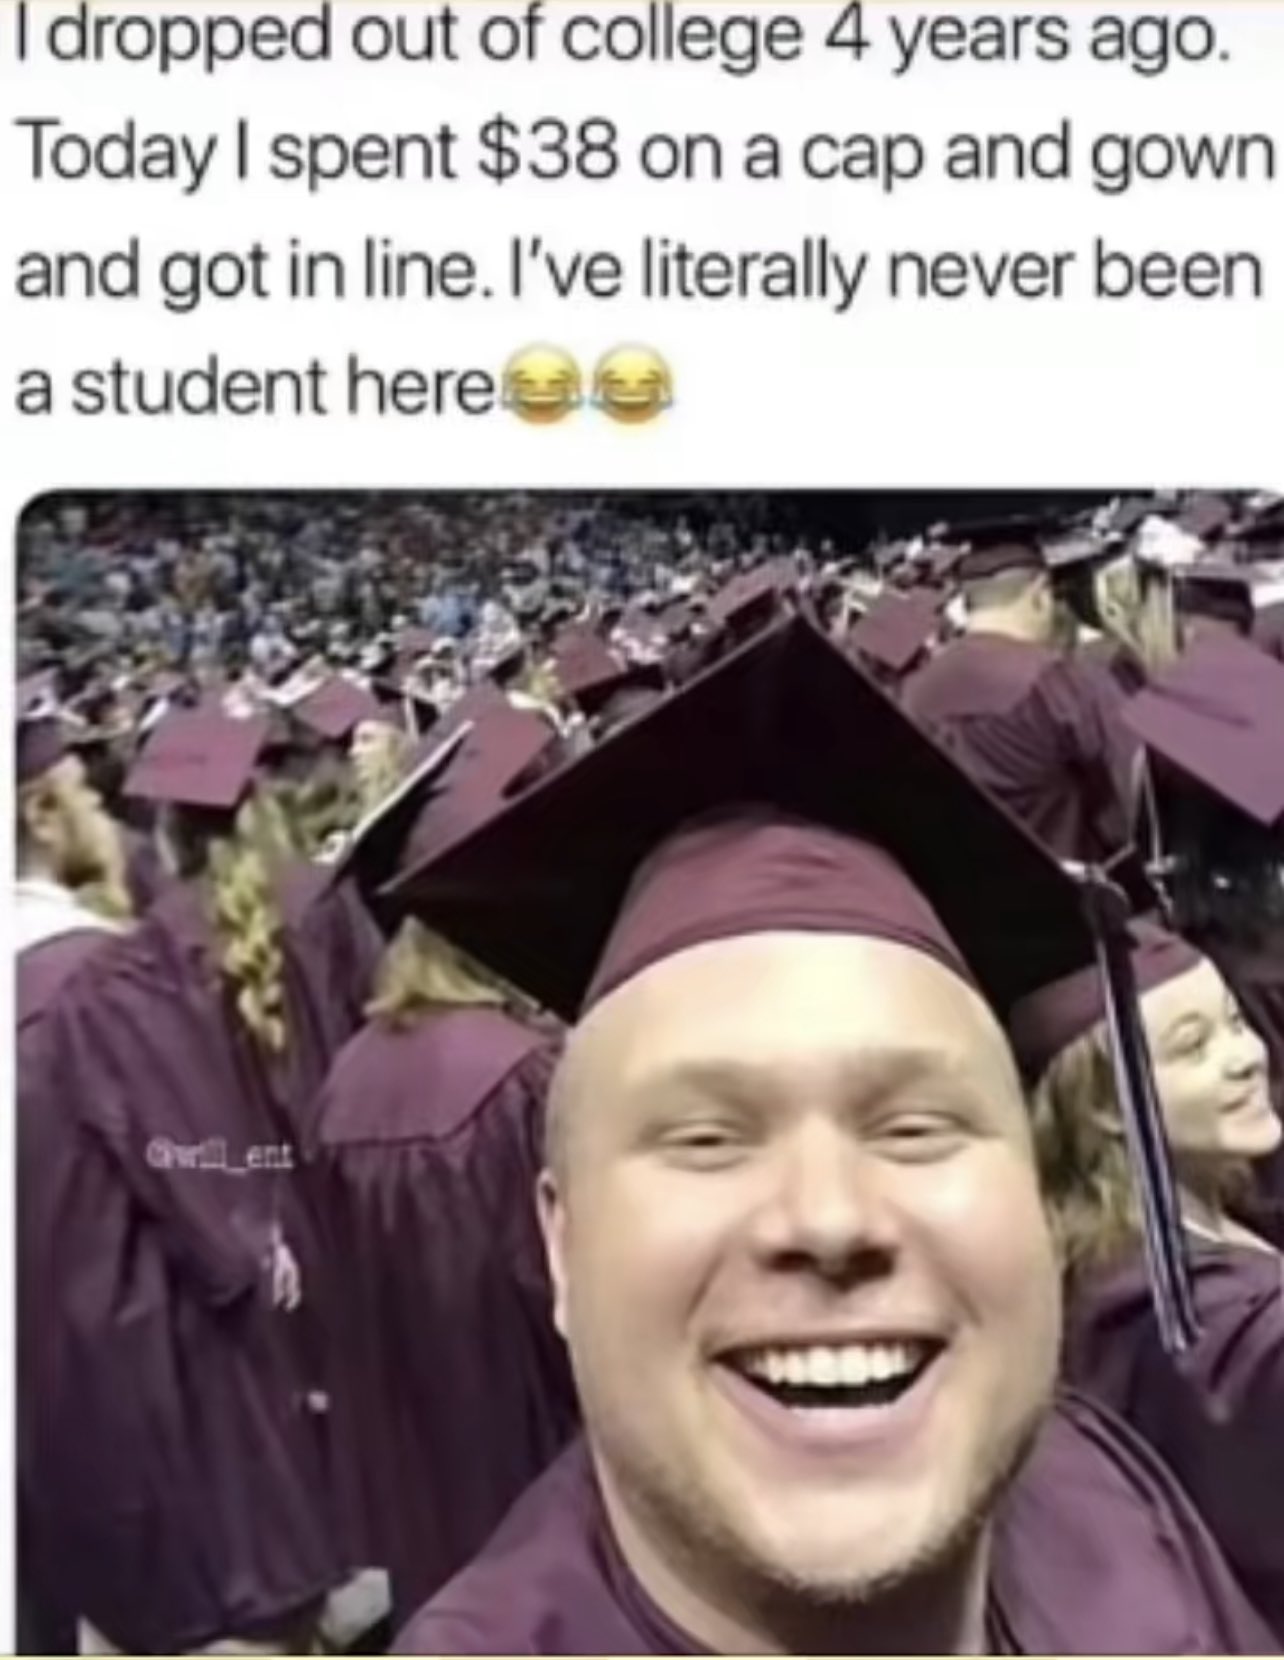 Dude had to graduate no matter what